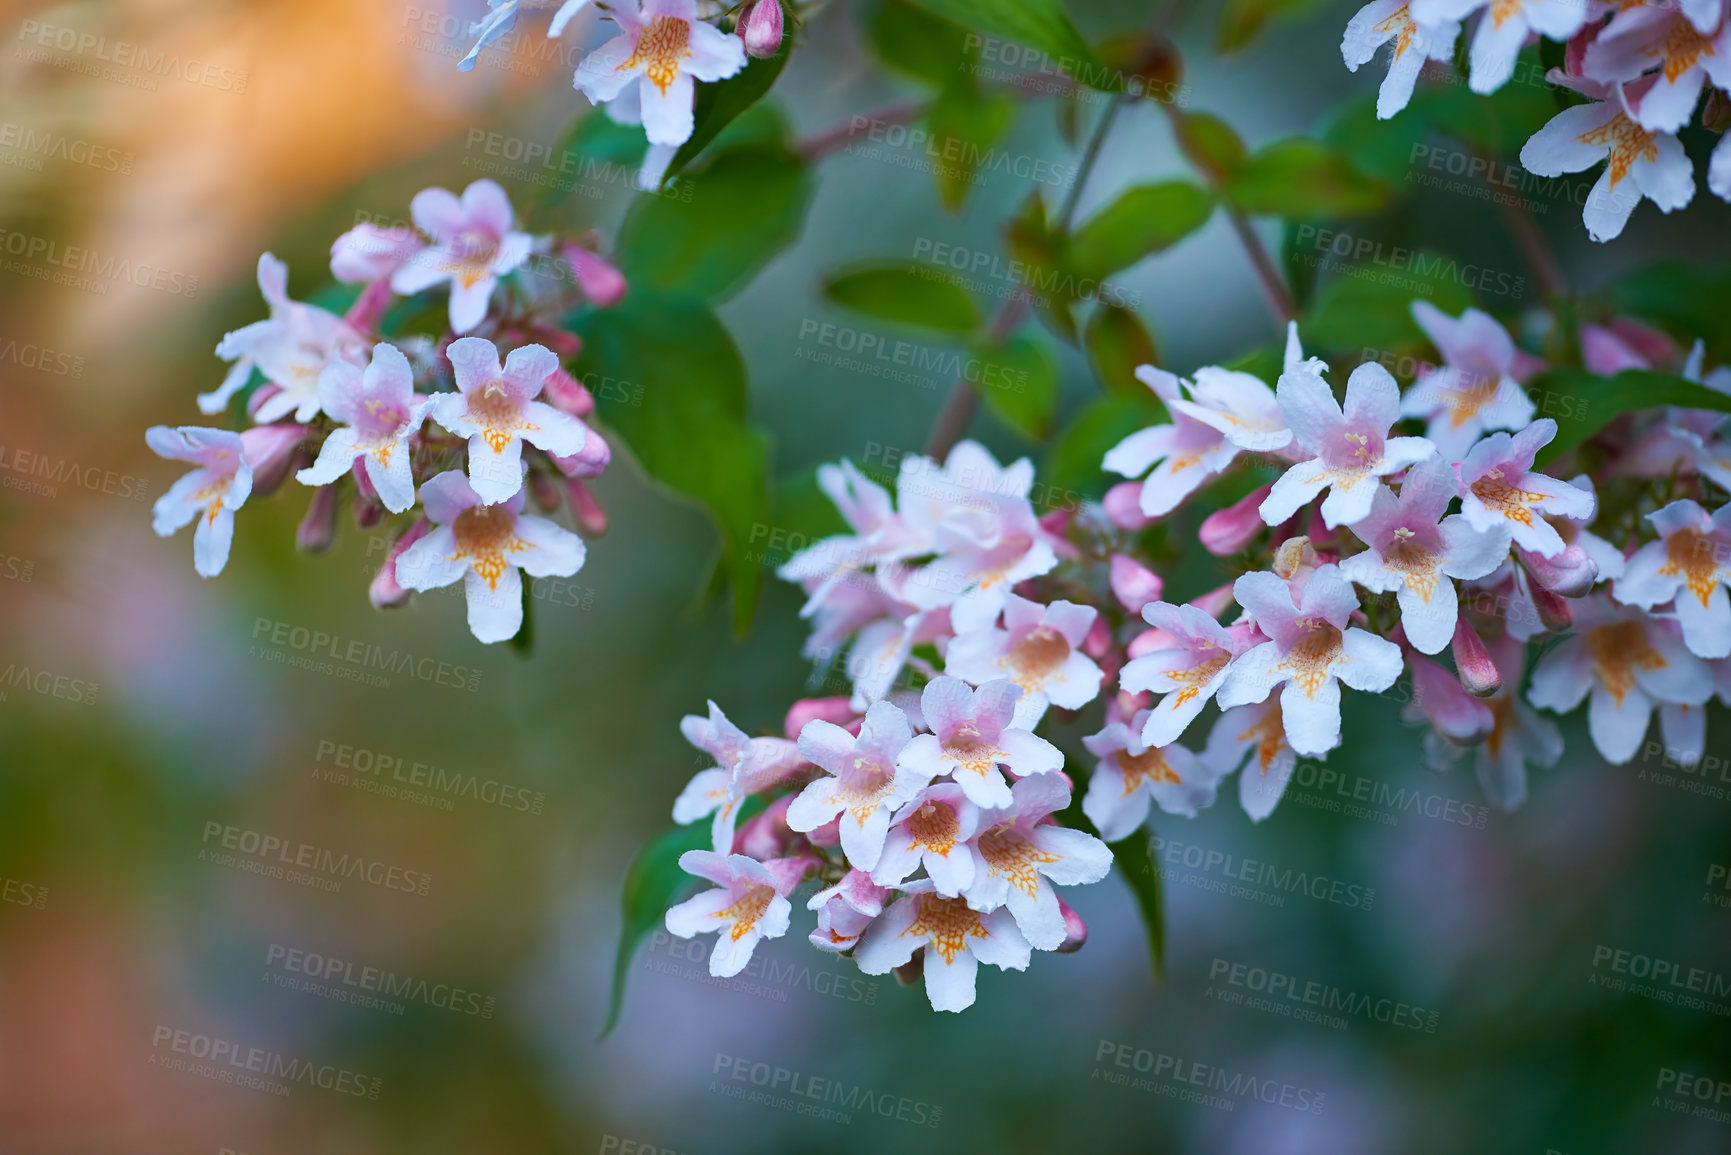 Buy stock photo Closeup of fresh beautybush flowers growing in a green garden in spring with a blurred background. Kolkwitzia Dreamcatcher in harmony with nature. A tranquil, wild flowerbed in a quiet, zen backyard